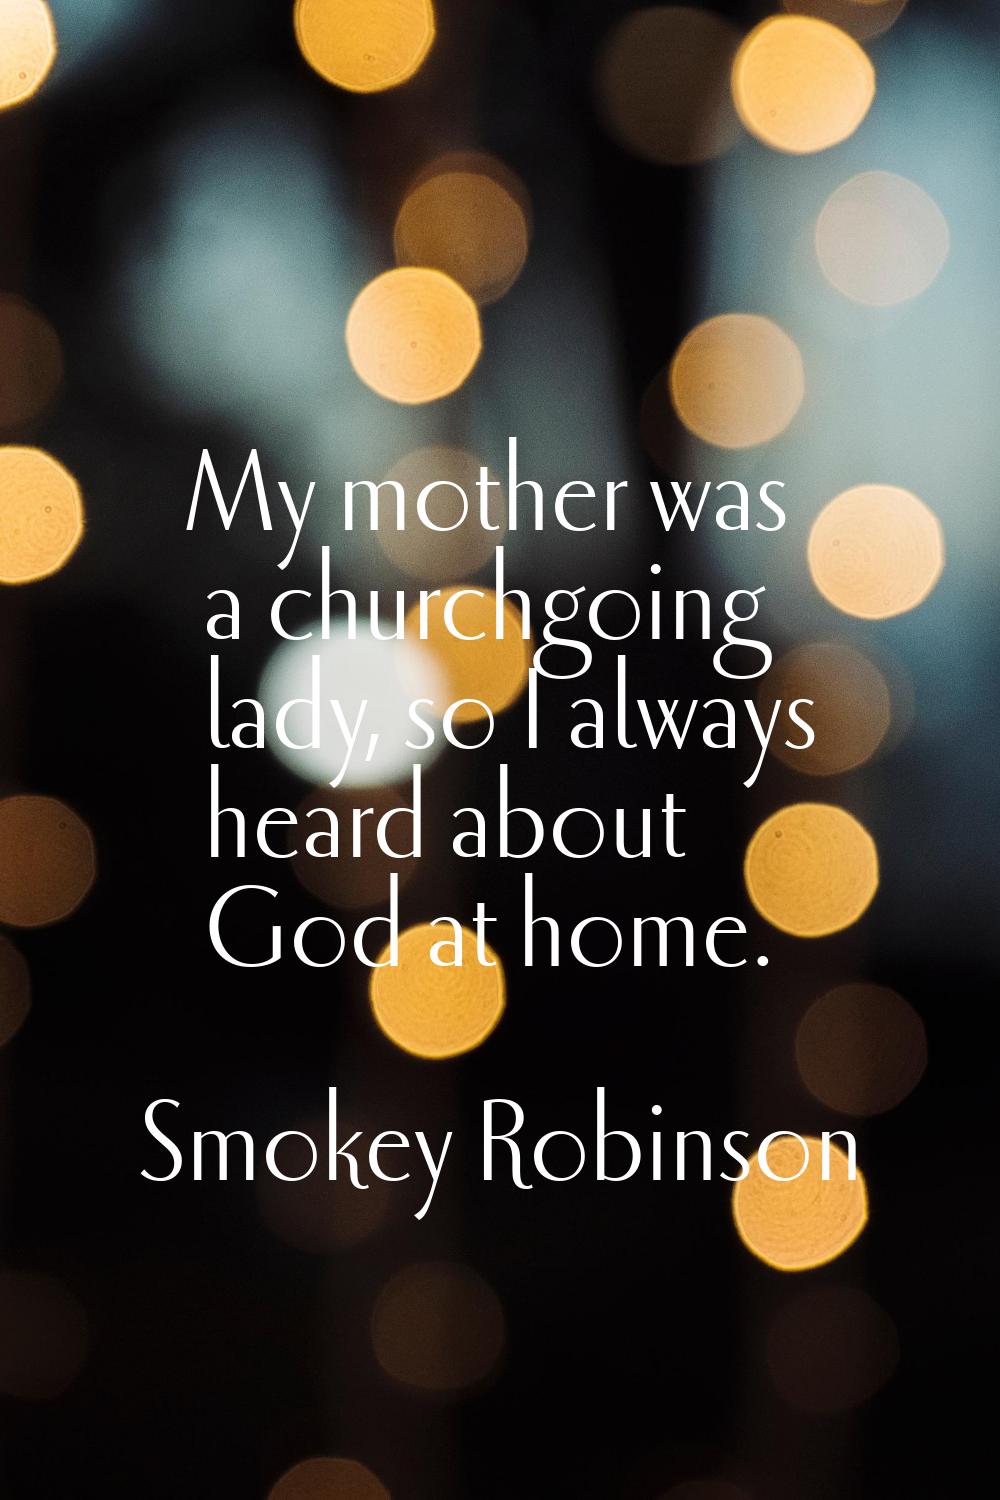 My mother was a churchgoing lady, so I always heard about God at home.